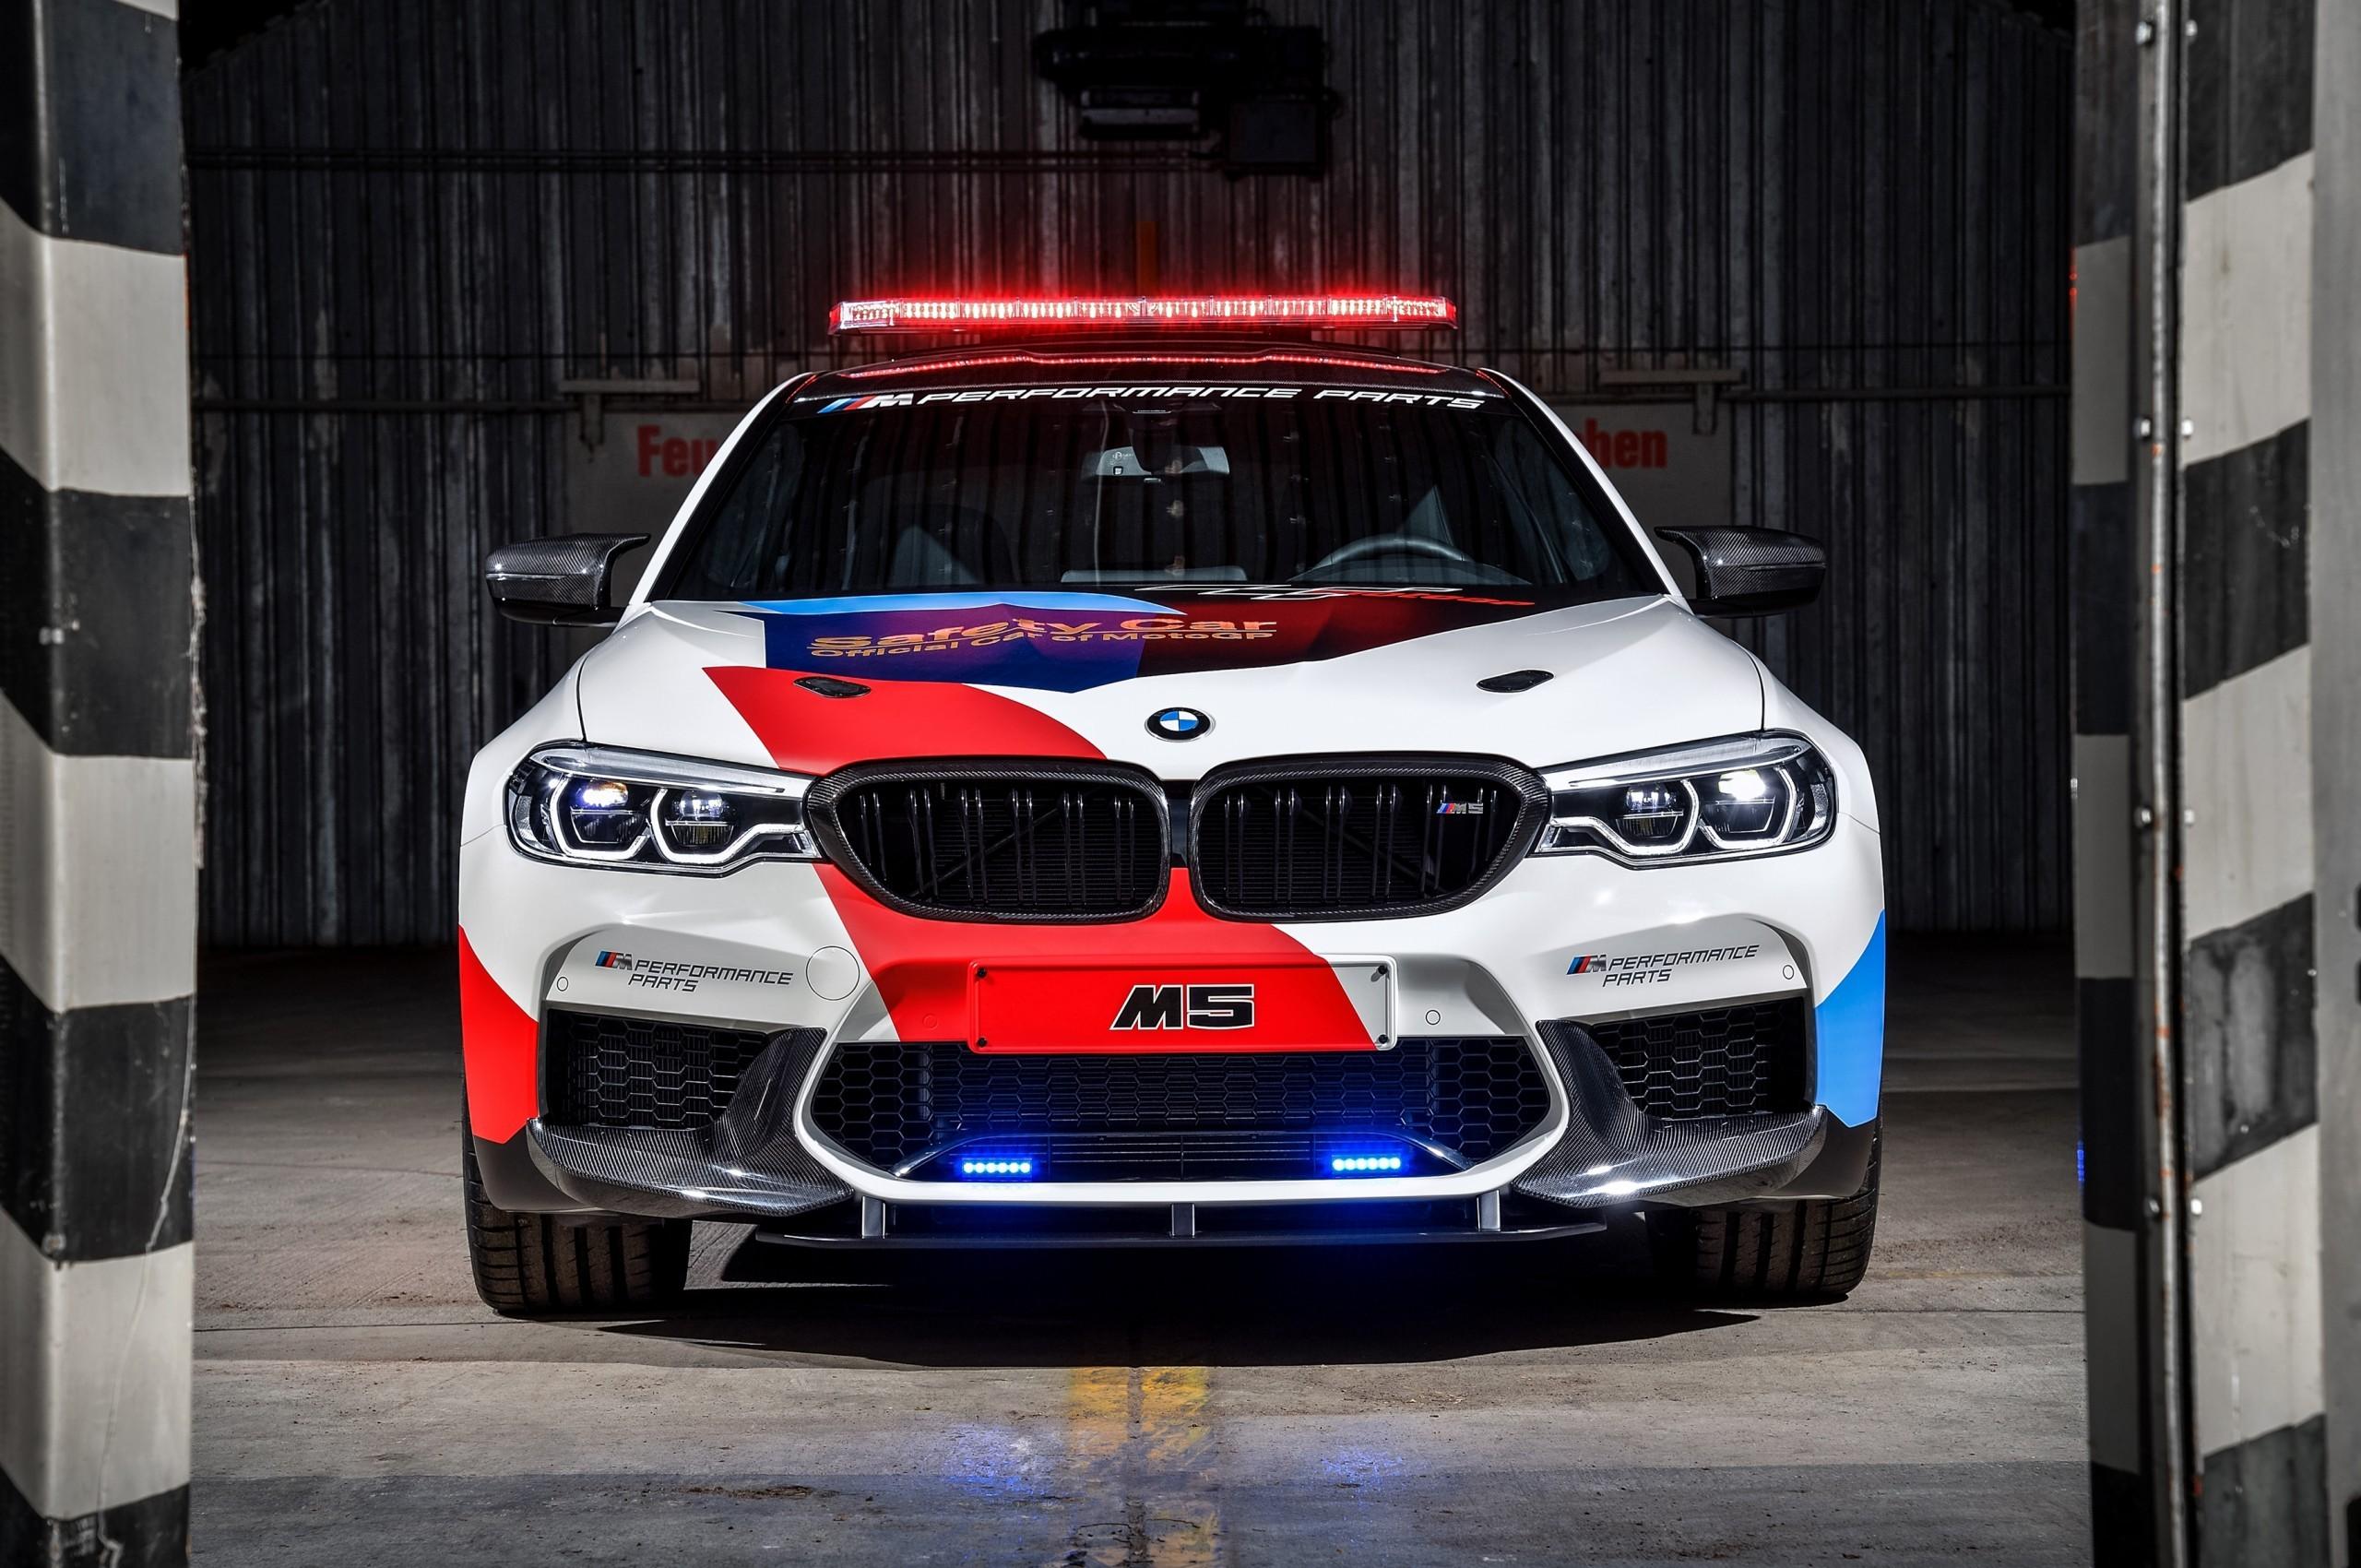 Download 2560x1700 Bmw M Safety Car, Front View, Cars Wallpaper